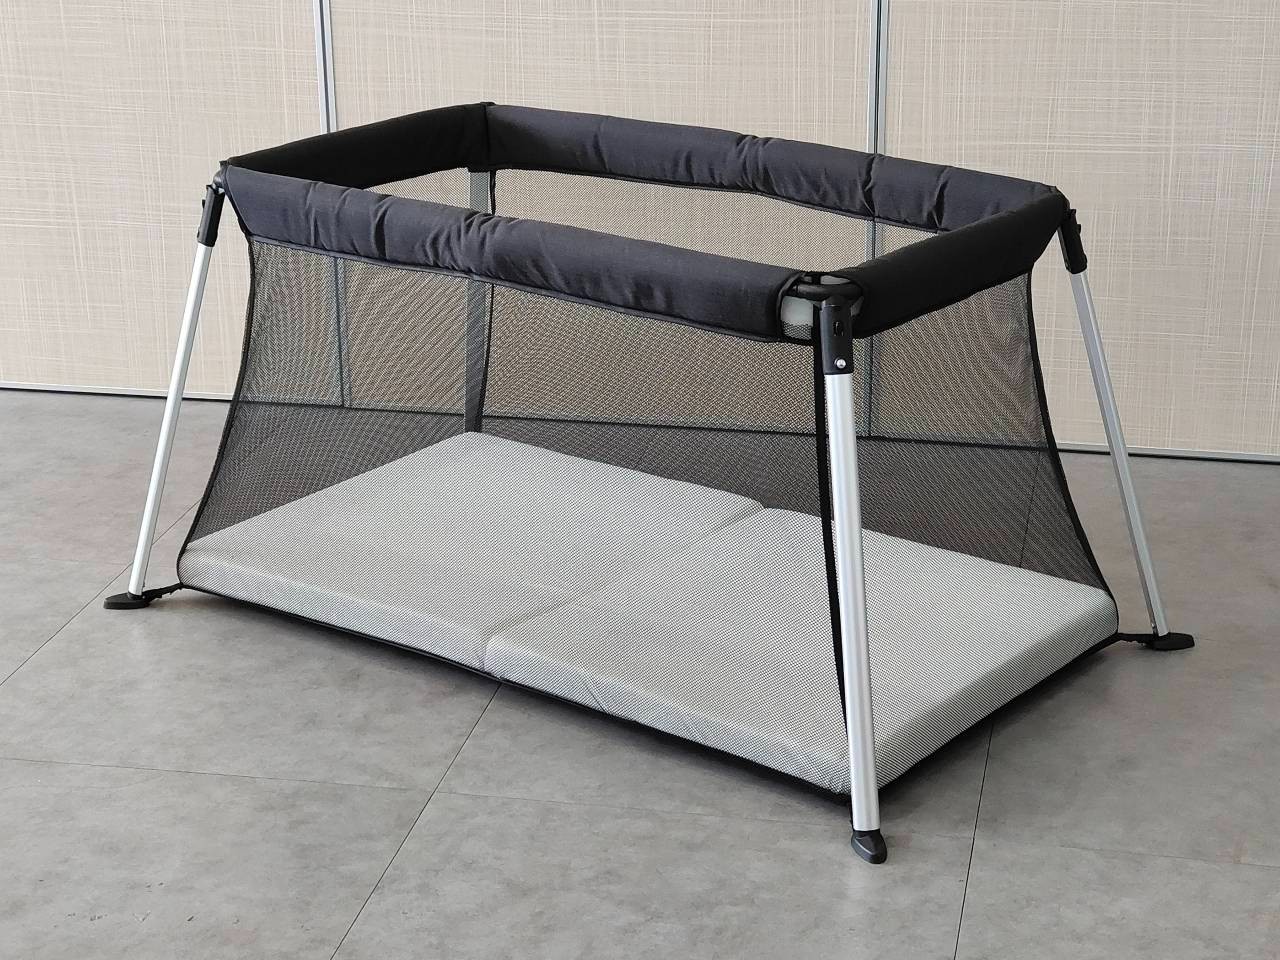 Newborn Baby Travel Cot Baby Crib Portable Child Toddler Cot folded Safety Baby Bed with mattress